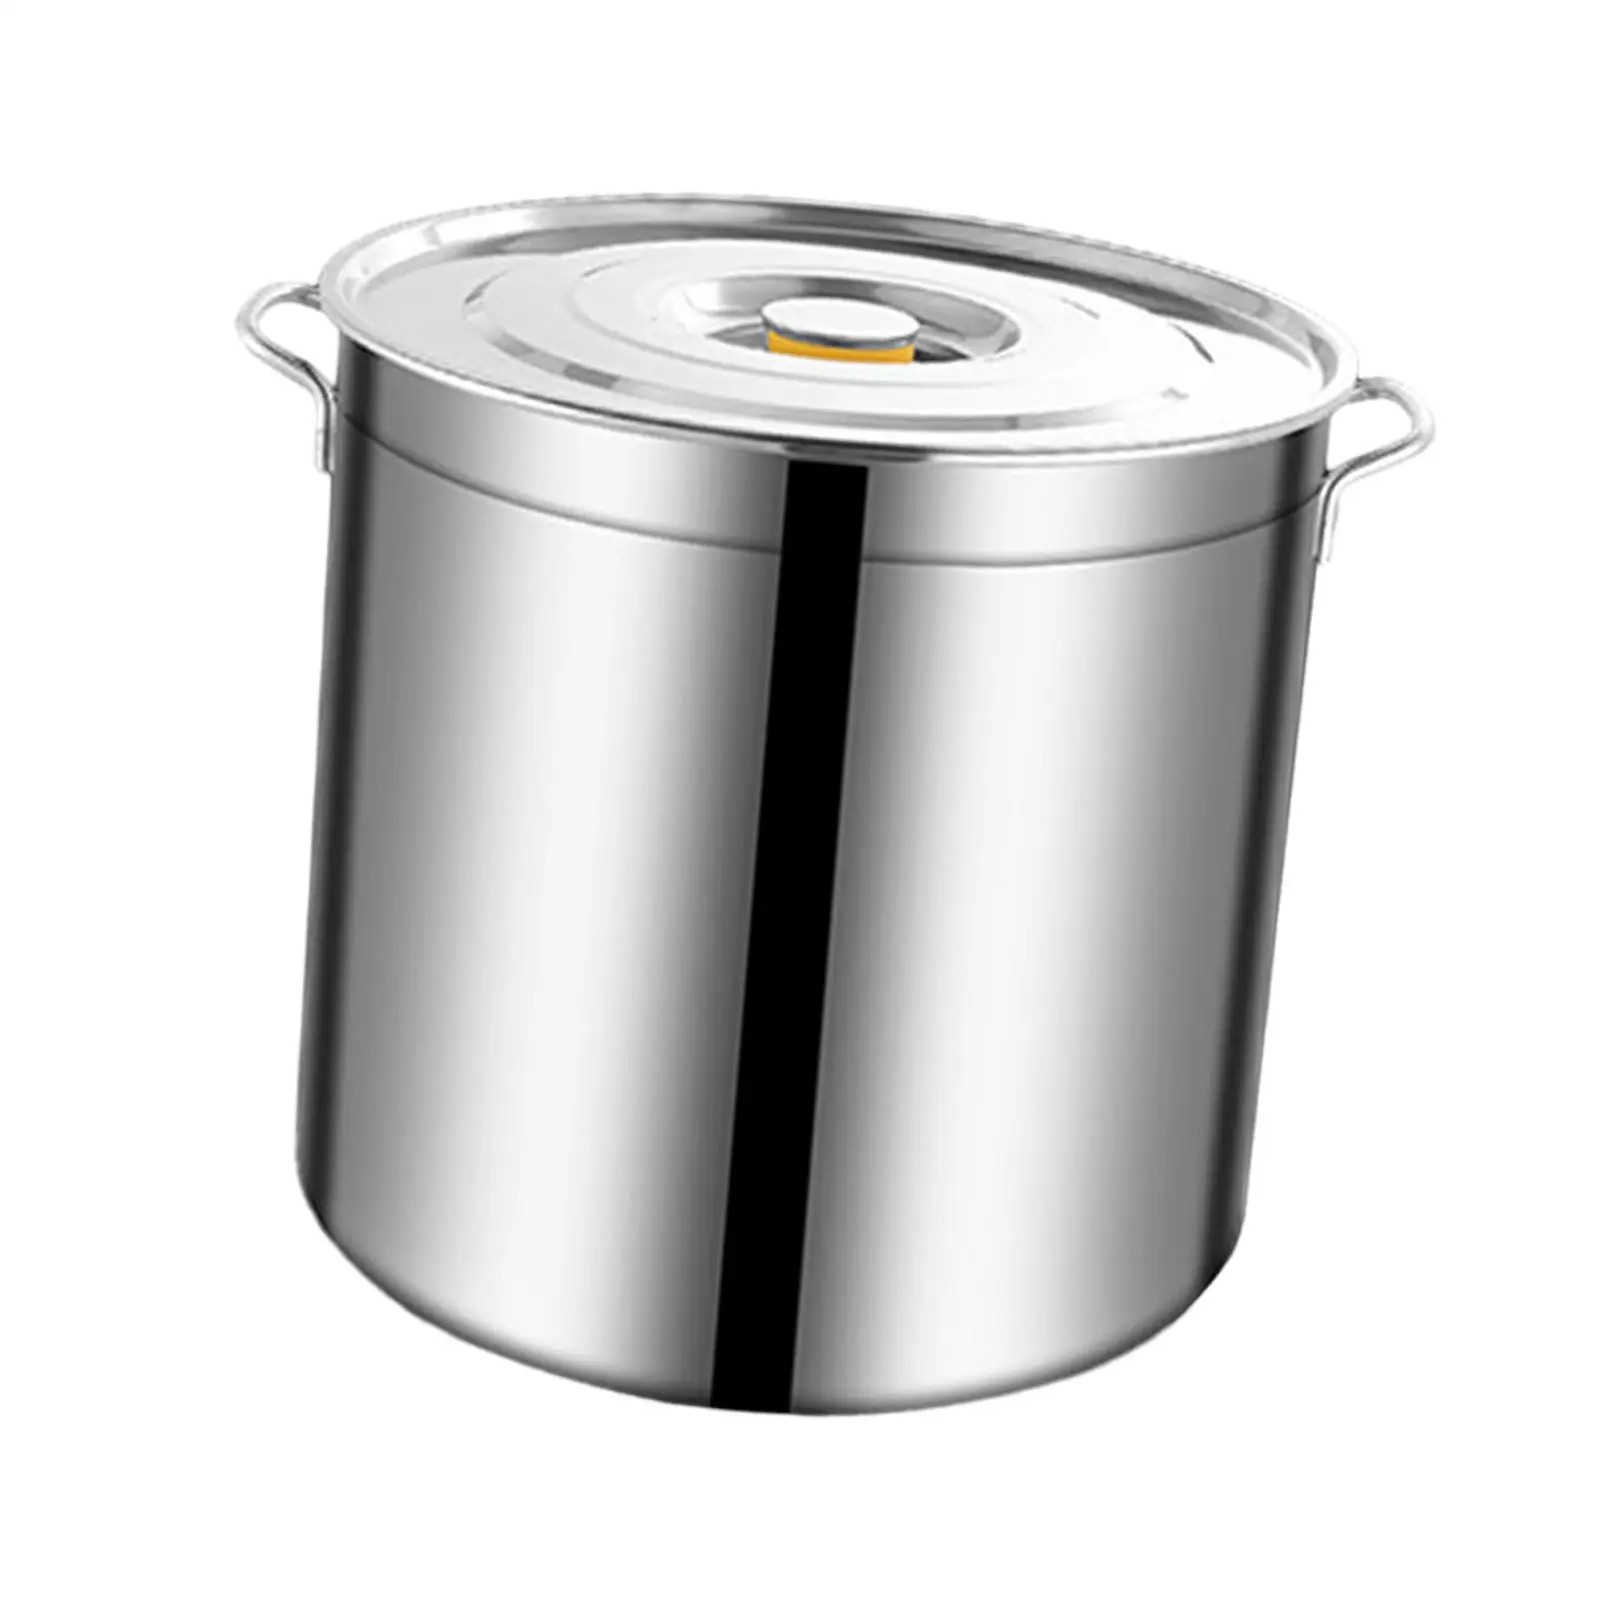 Stainless Steel Stockpot Easy to Clean Oil Bucket Canning Pasta Pot with Lid Tall Cooking Pot for Household Commercial Canteens